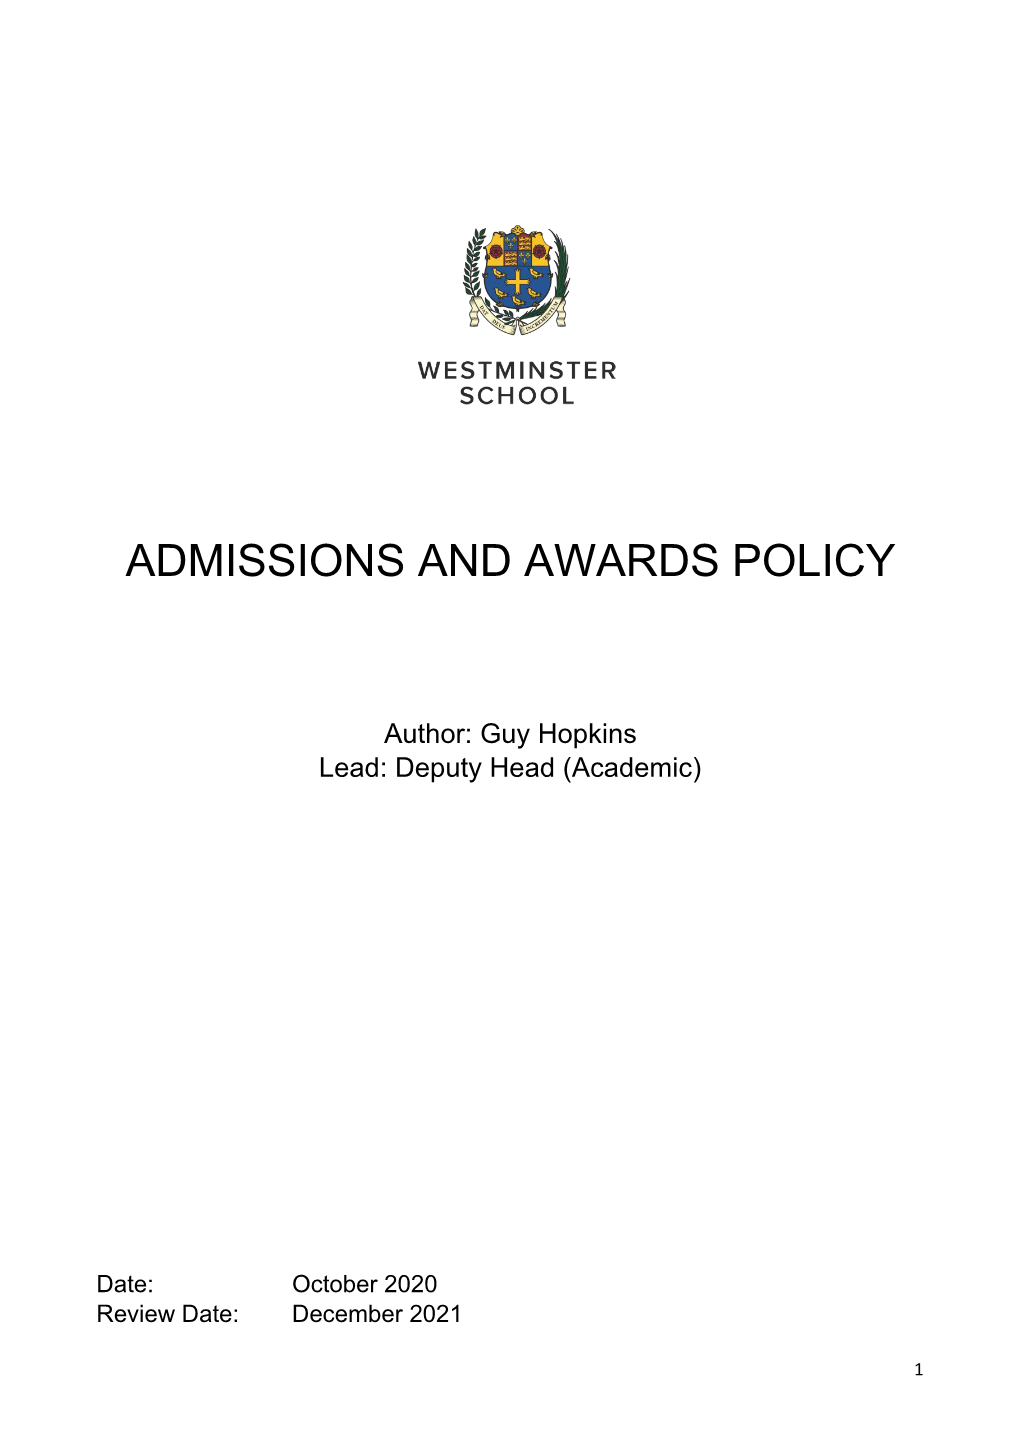 Admissions and Awards Policy